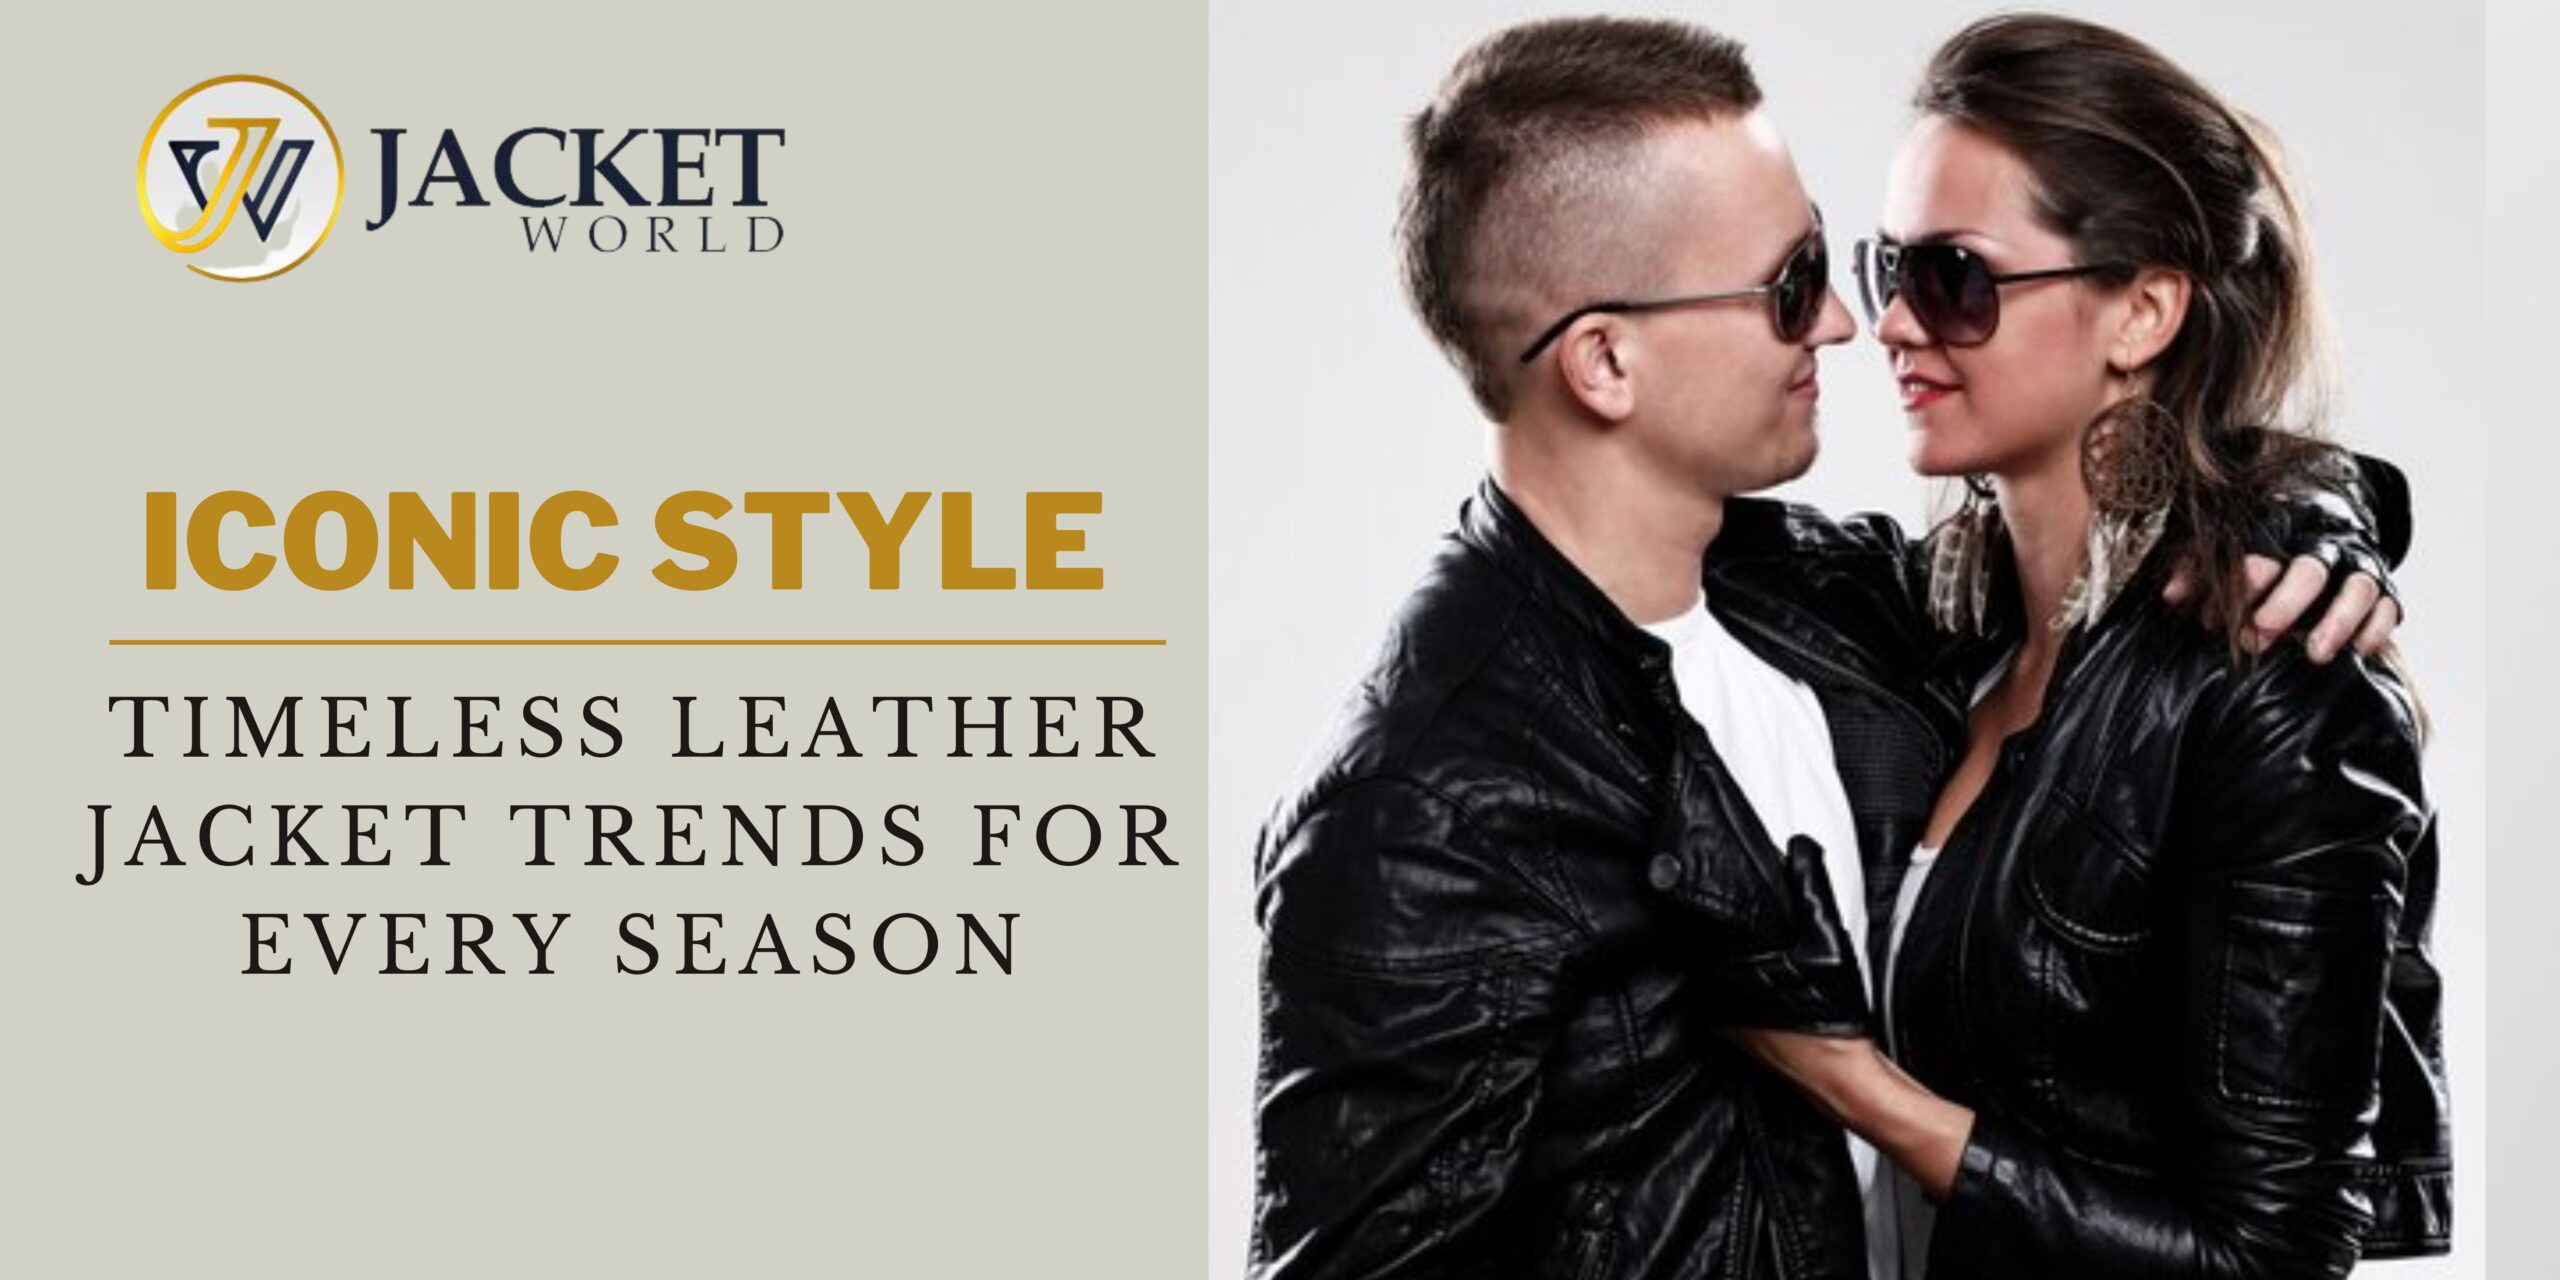 Iconic Style: Timeless Leather Jacket Trends for Every Season